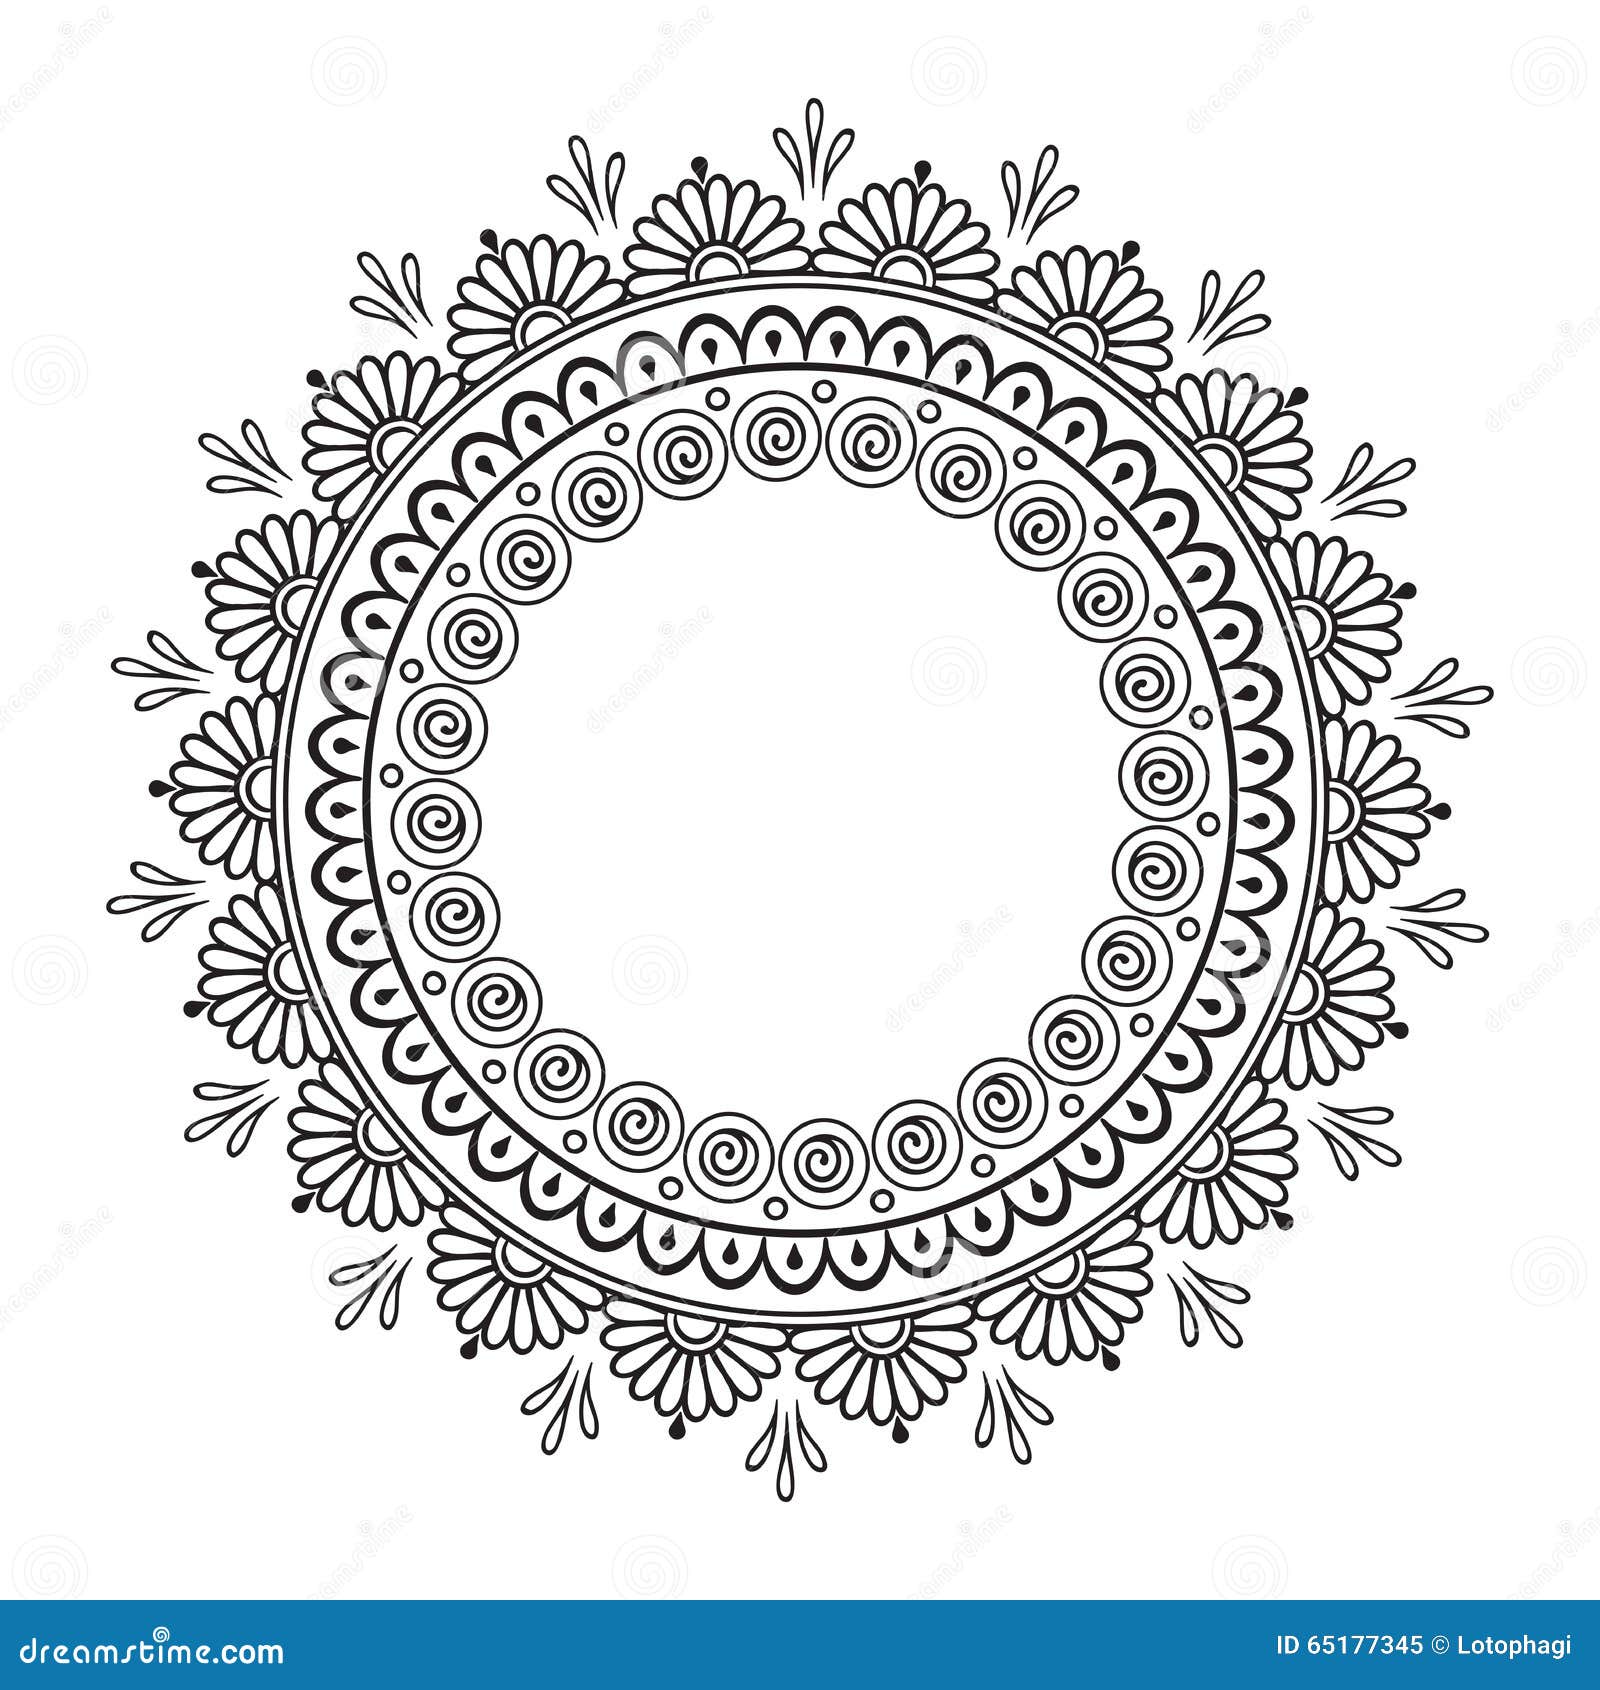 stock illustration coloring book pages kids adults hand drawn abstract design decorative indian mandala round lace ornate frame plate image